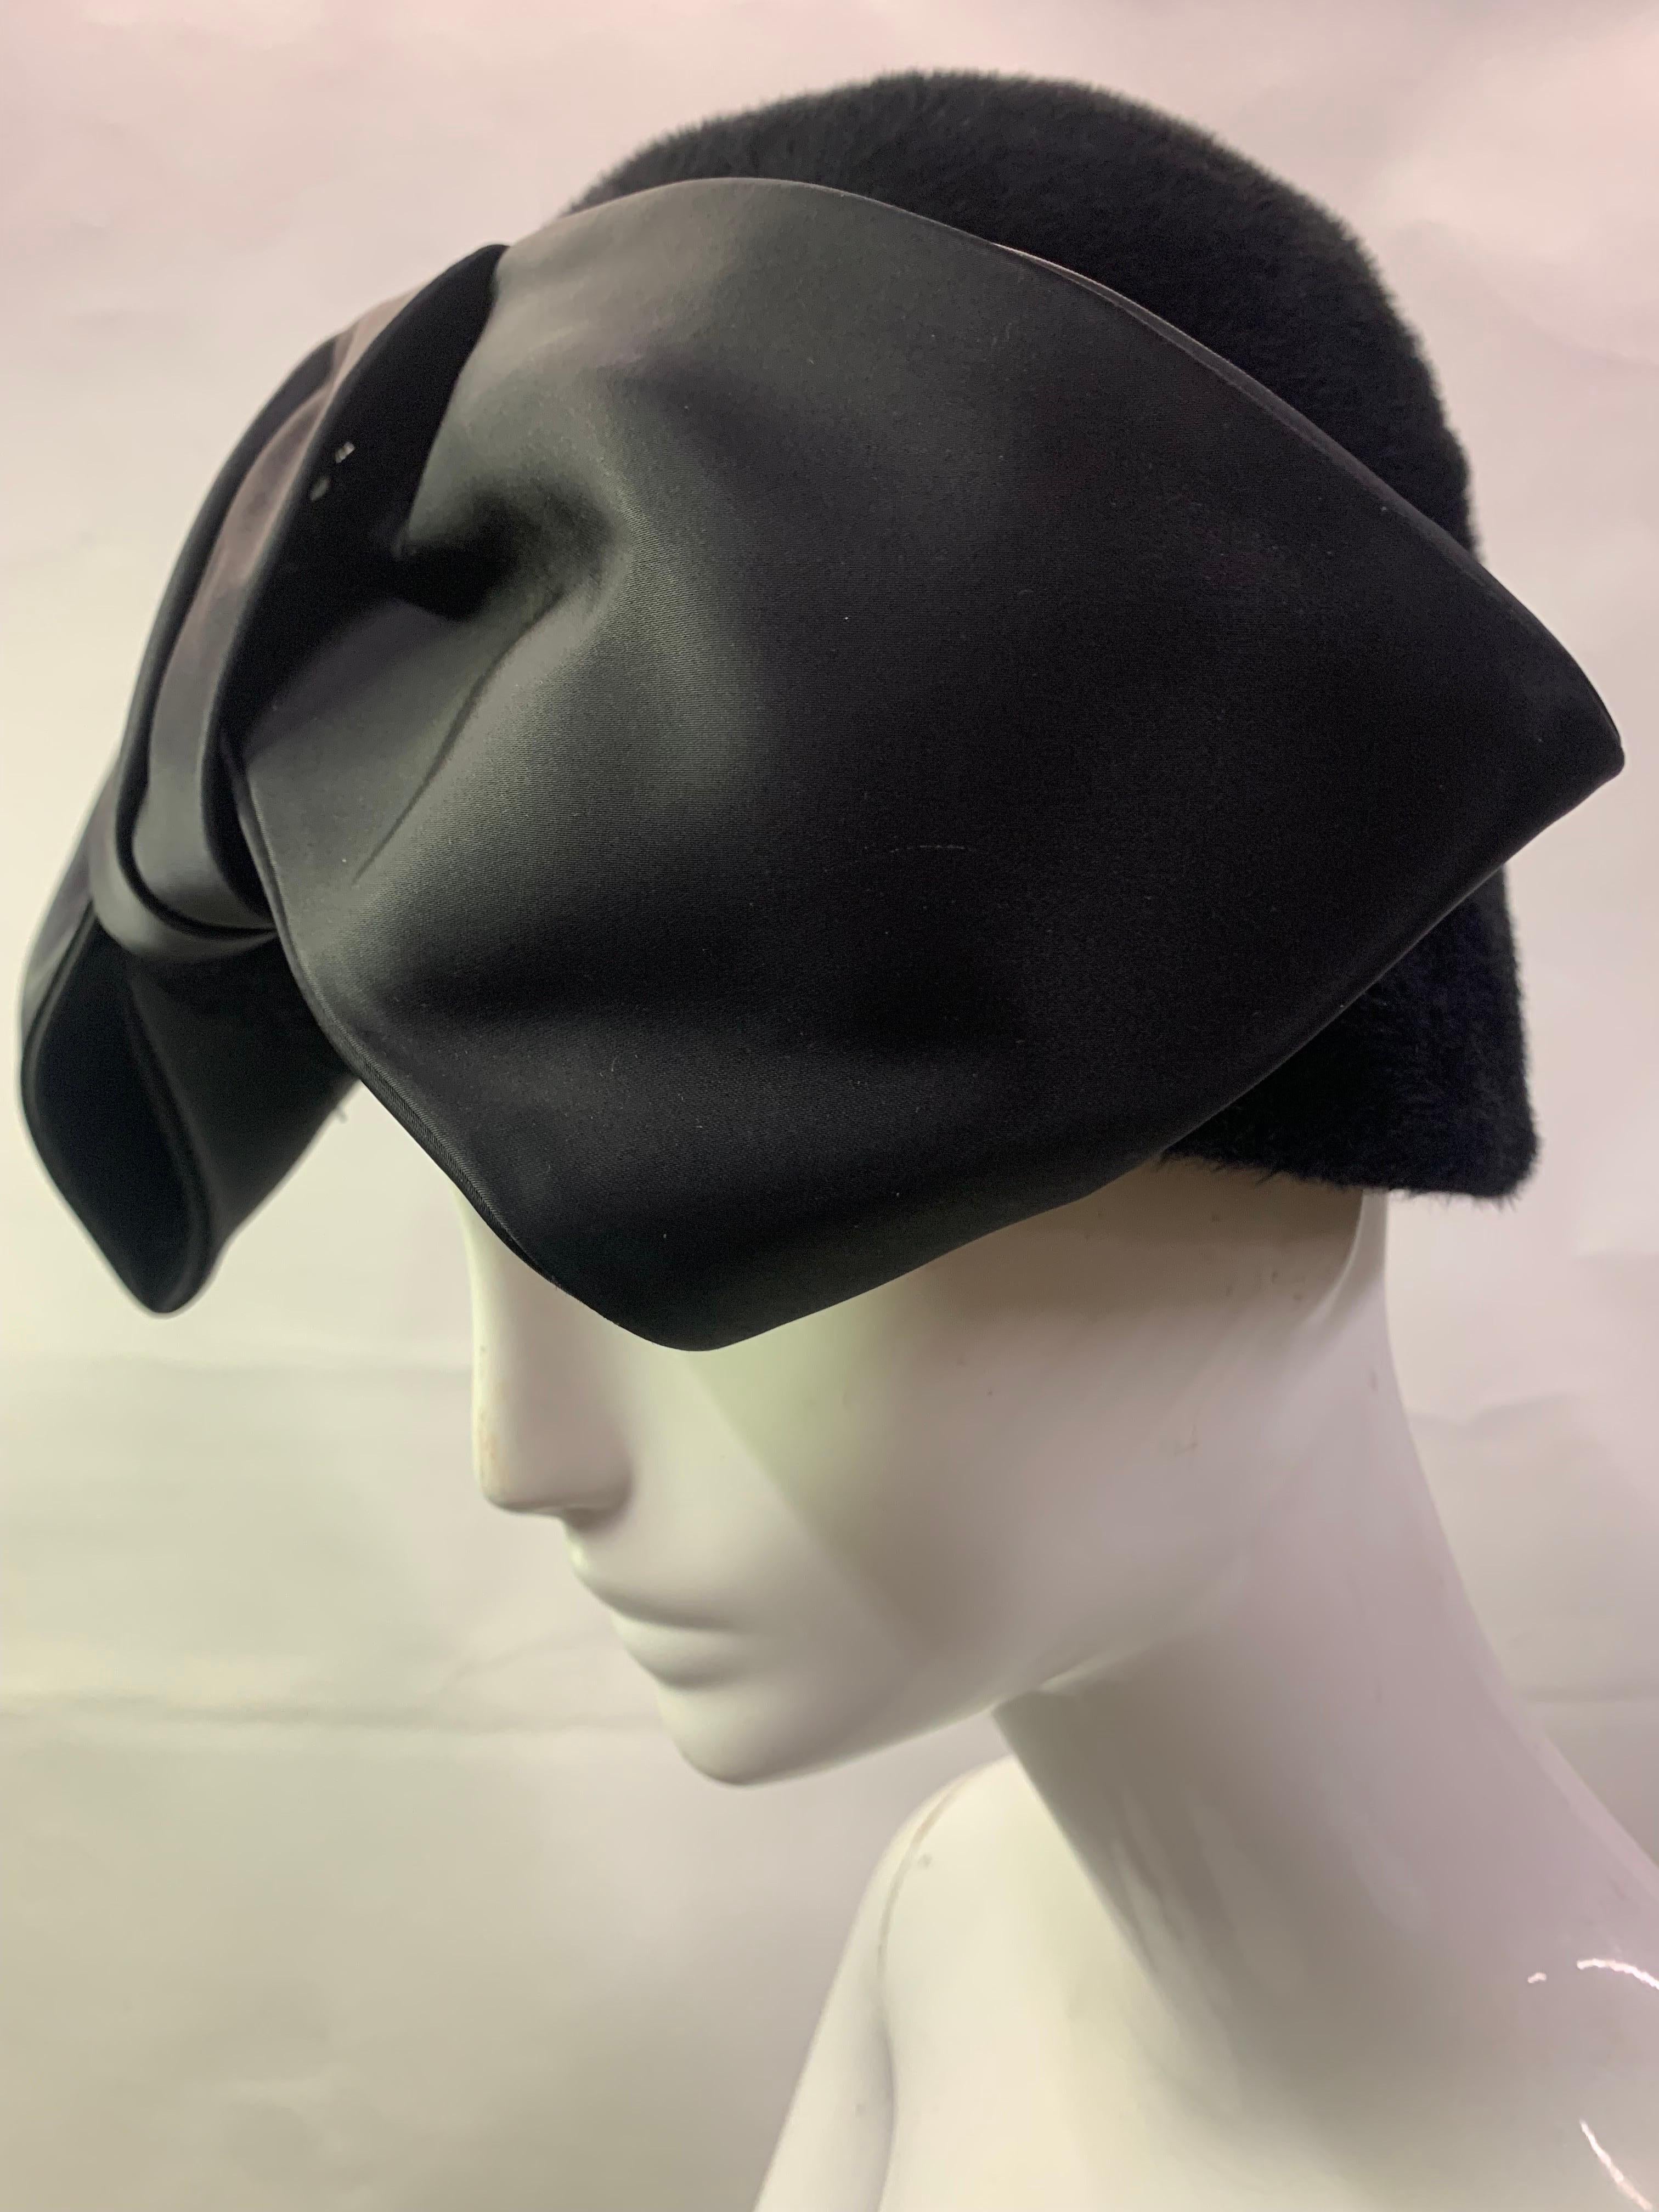 1960s Schiaparelli Black Wool Felt Cloche Hat w Huge Silk Bow At Front.  A striking homage to the classic 1920s style this plush and furry cloche is as stunning today as ever with its show-stopping, oversized matte silk bow!   Size Medium-Large. 